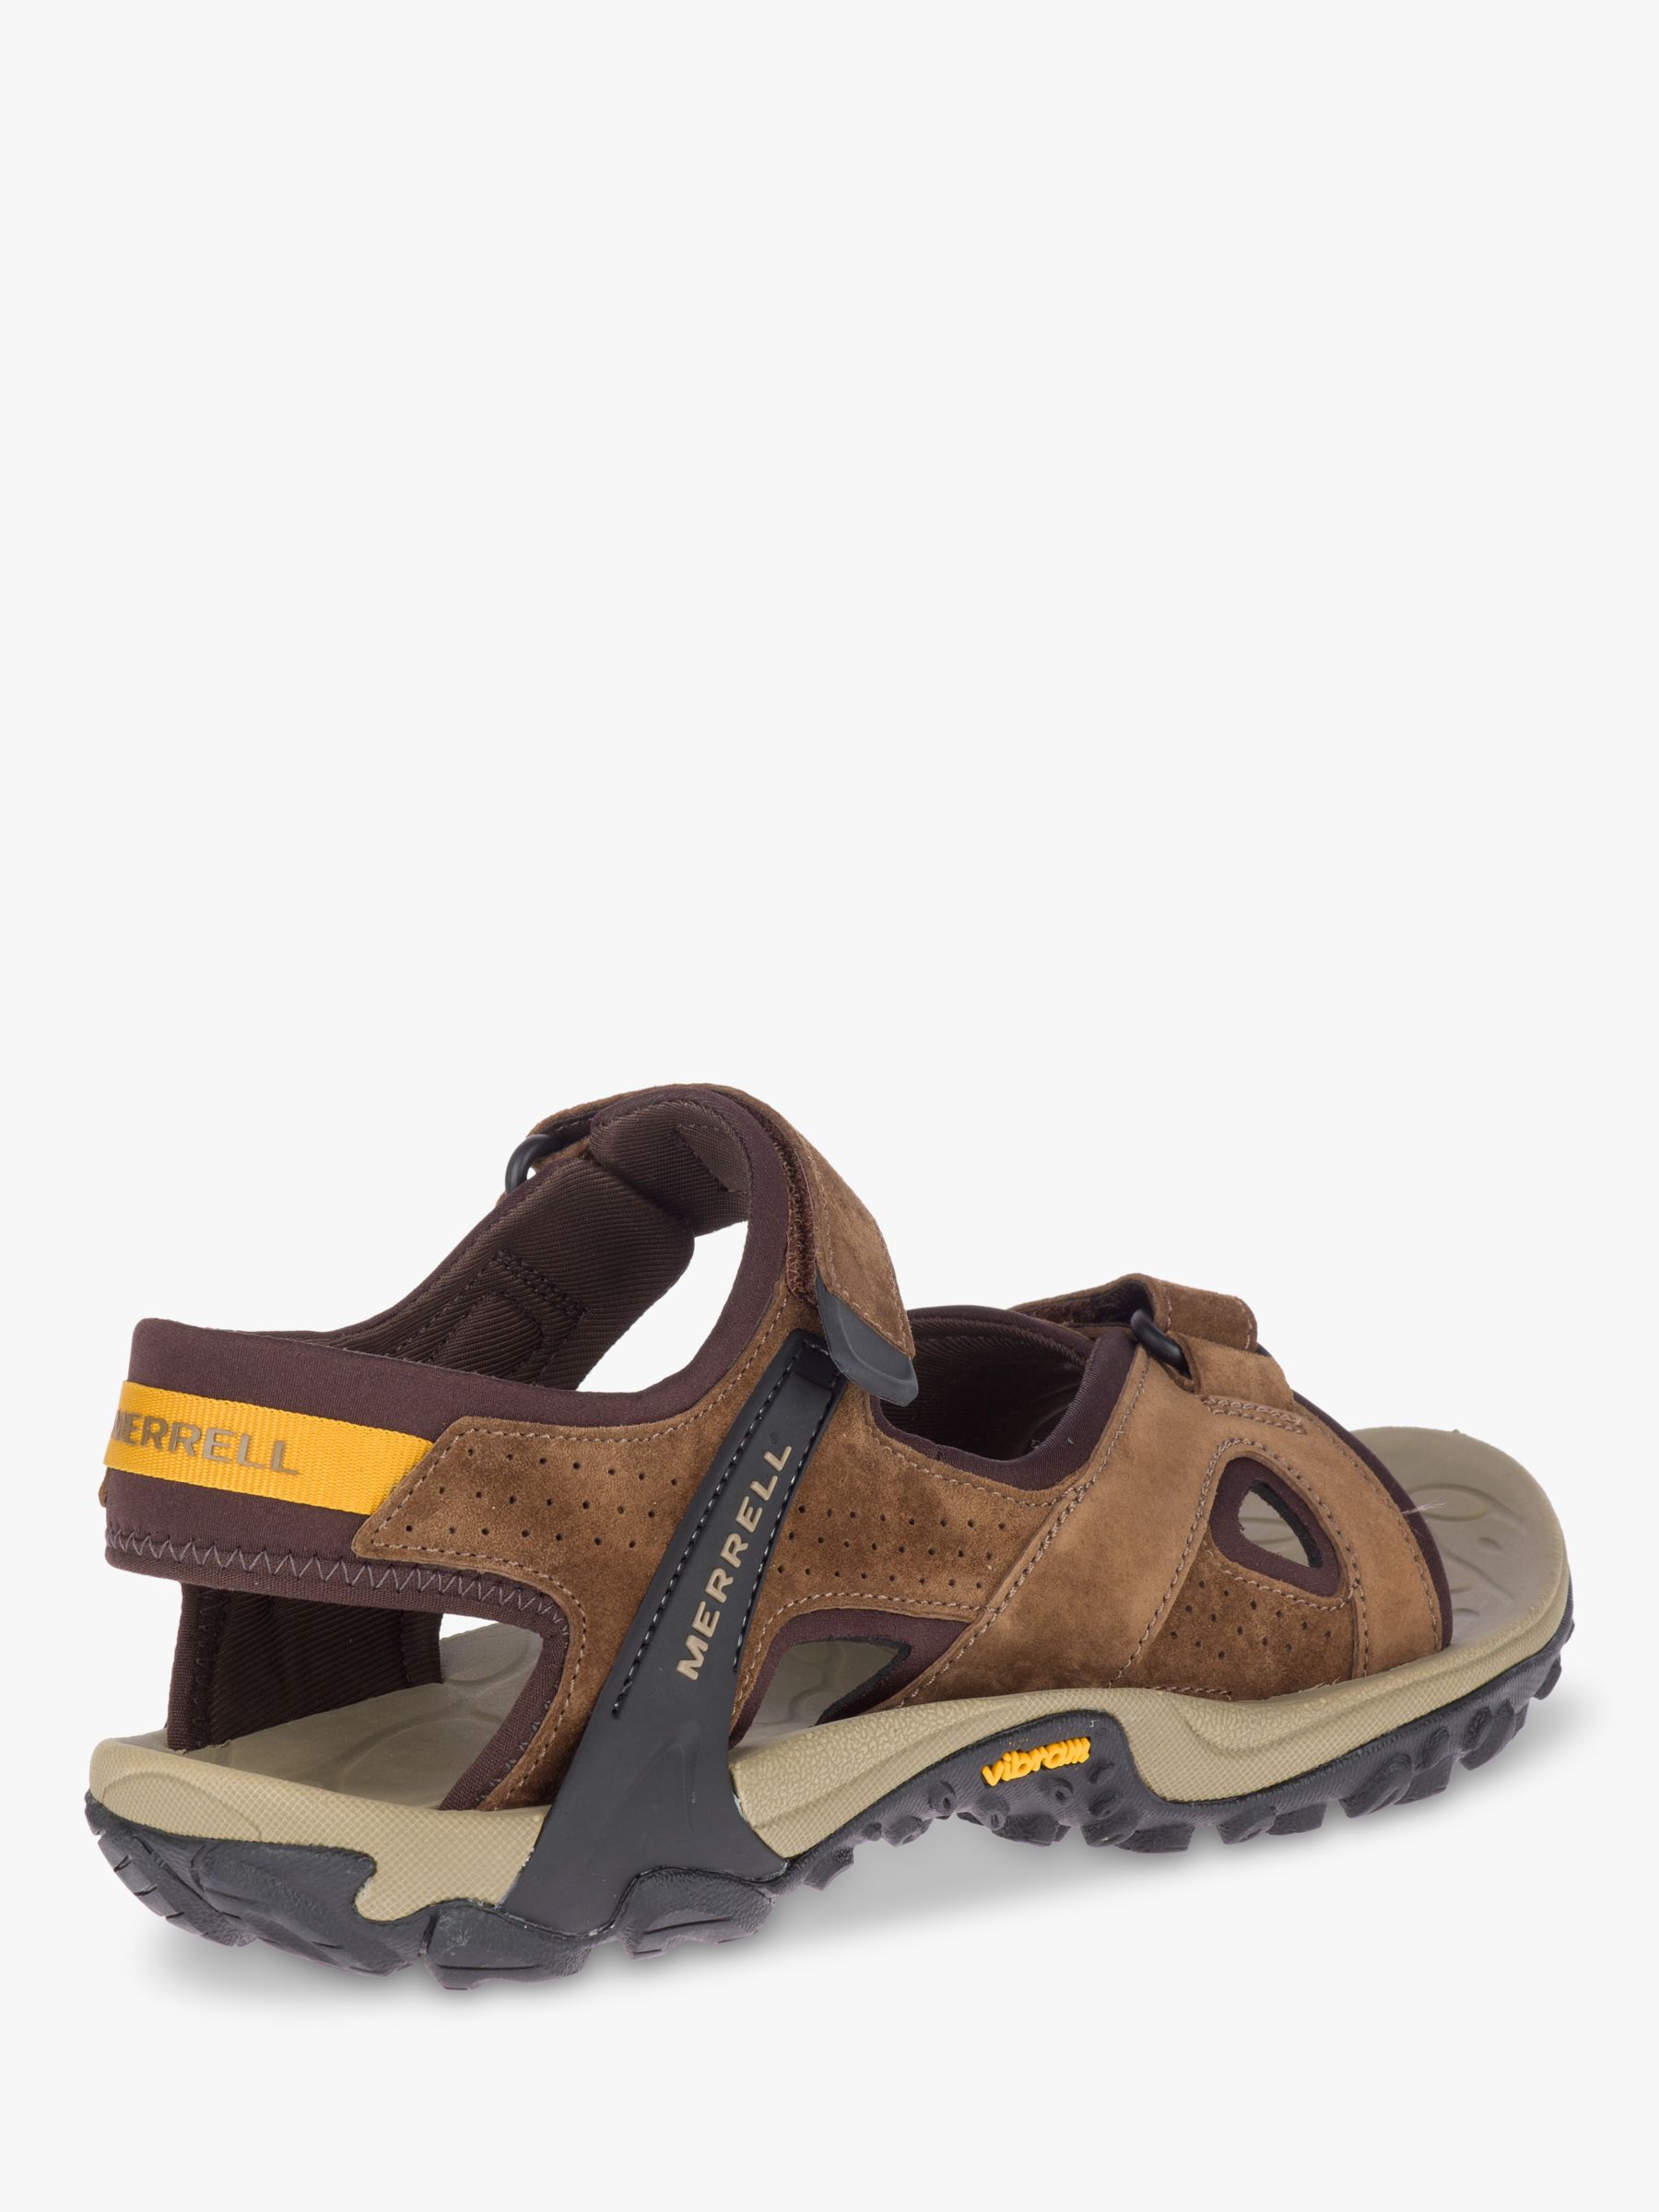 Merrell Kahuna Walking Sandals at Lewis Partners